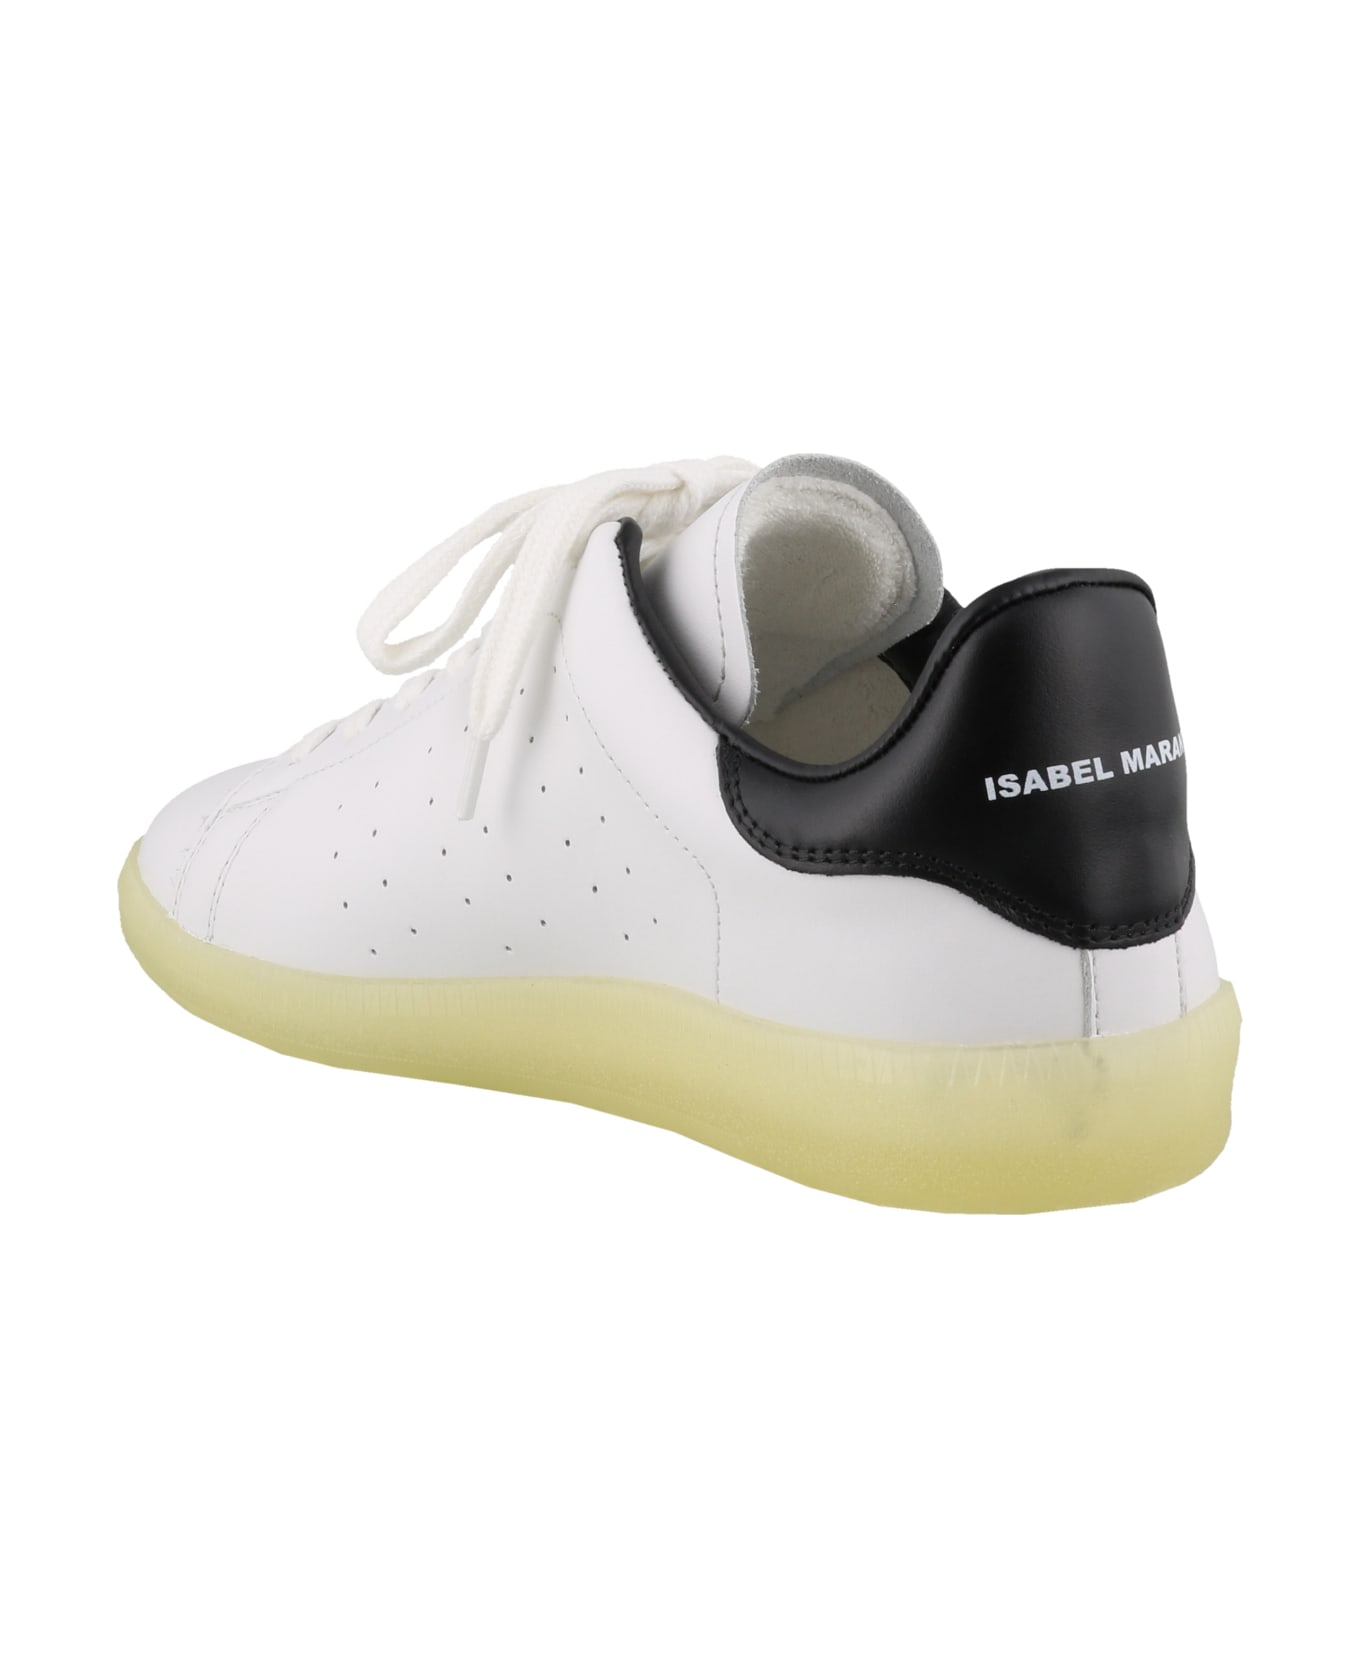 Isabel Marant Billyo Sneakers - Giallo